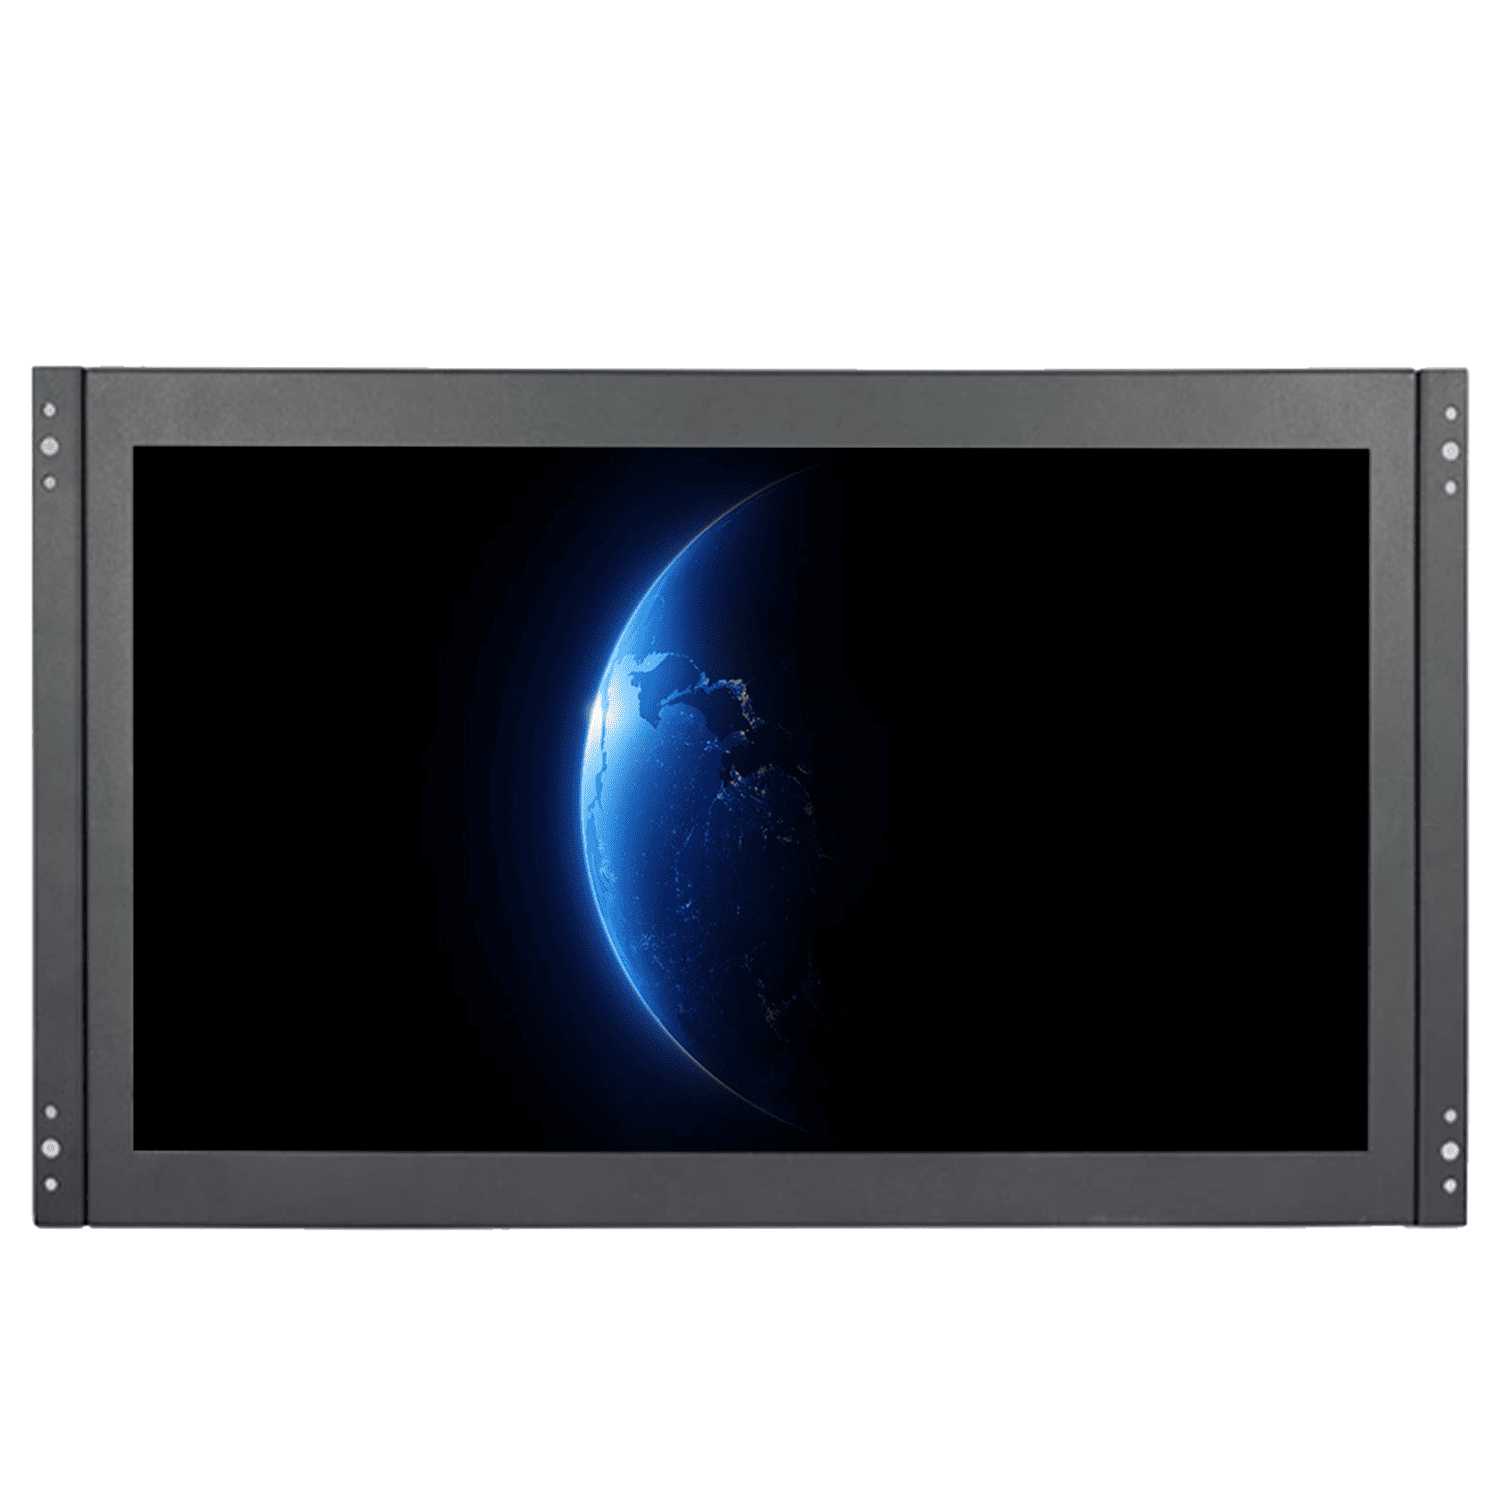 15.6 inch high-definition industrial touch open VGAHDMI LCD monitor